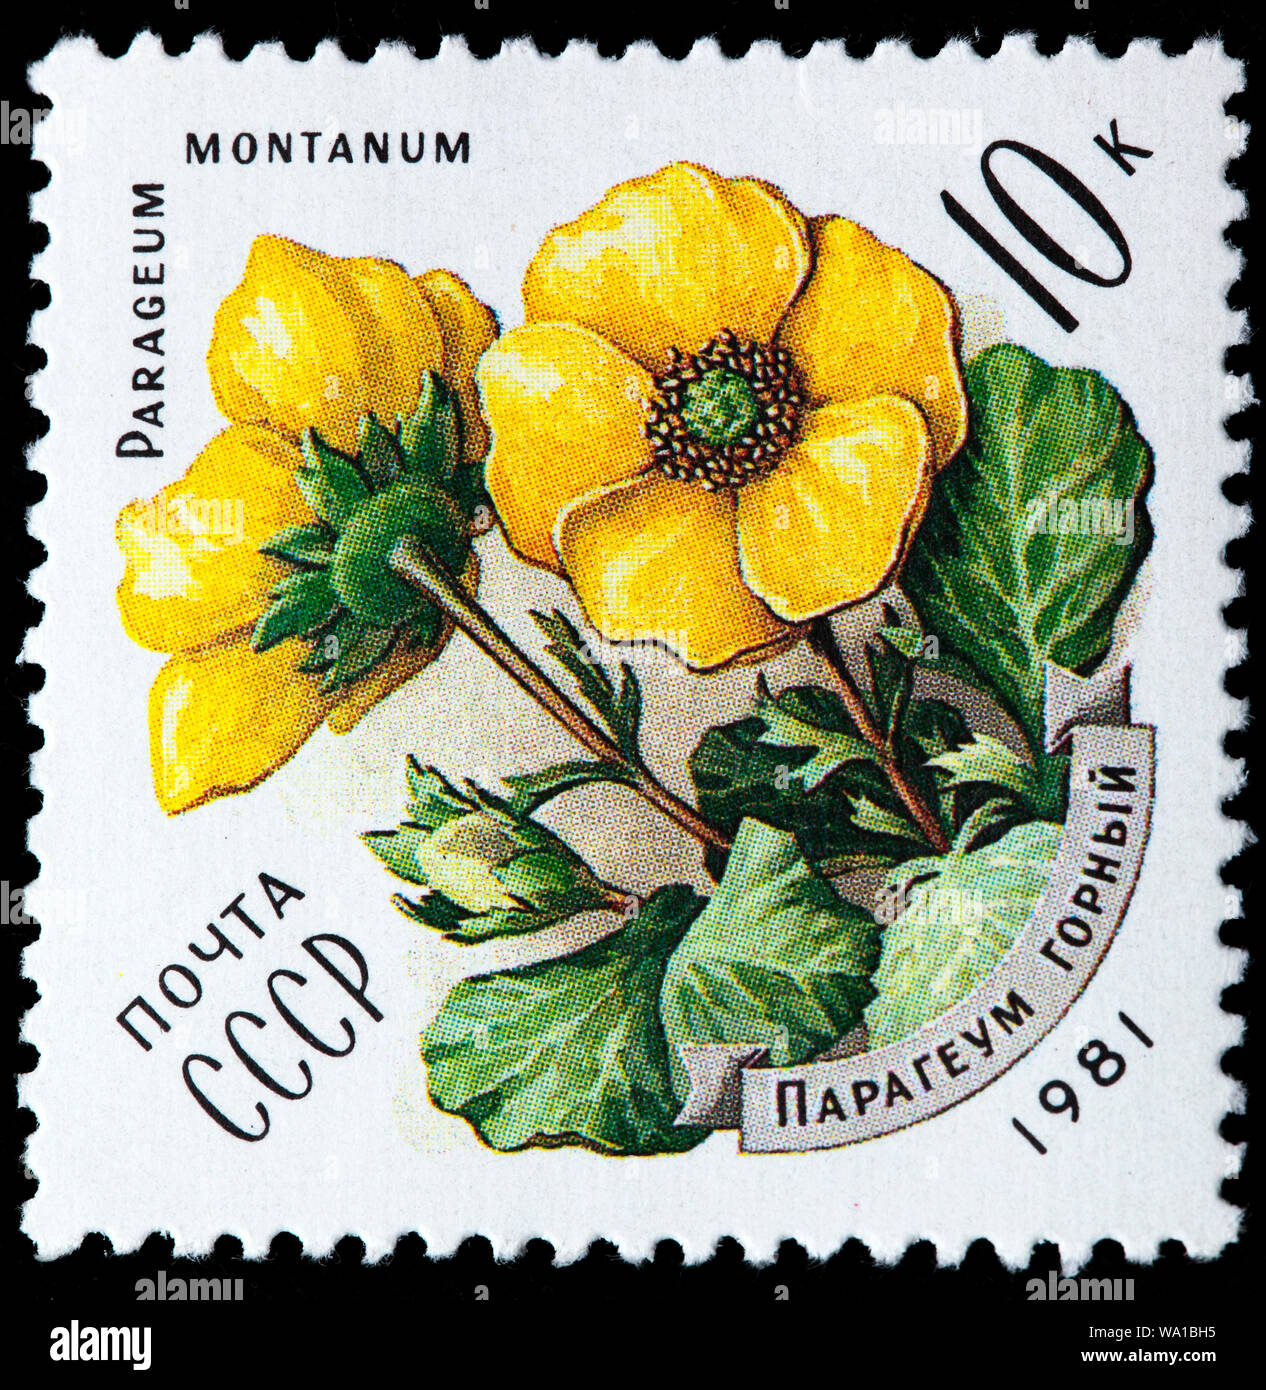 Geum montanum, Alpine avens, Flowers of the Carpathians, postage stamp, Russia, USSR, 1981 Stock Photo